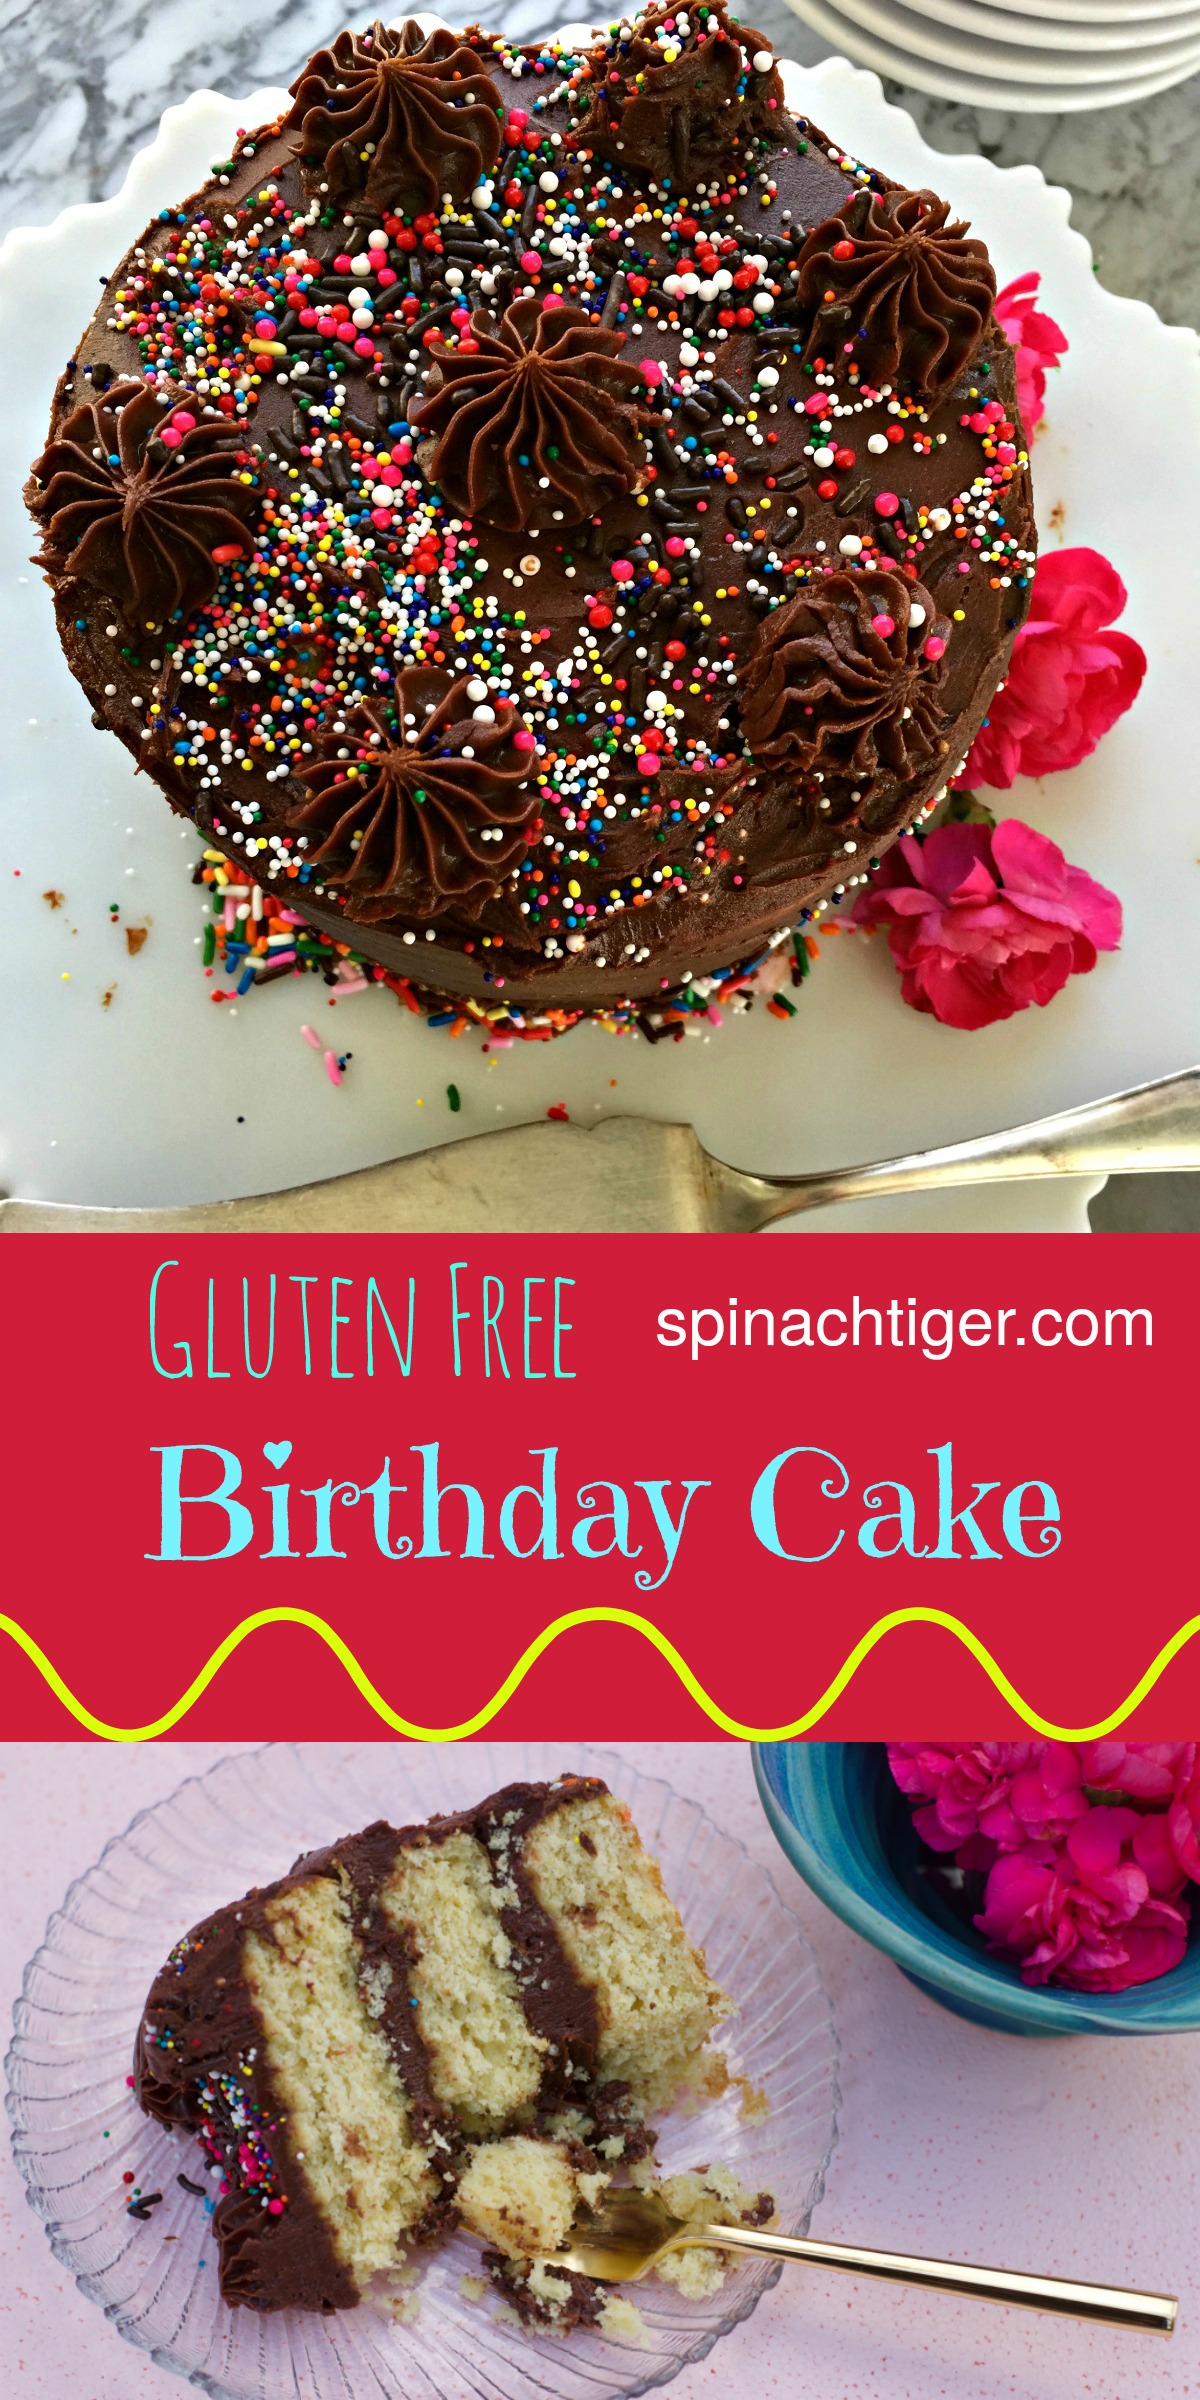 Gluten Free Yellow Cake Birthday Cake with Chocolate Frosting from Spinach TIger